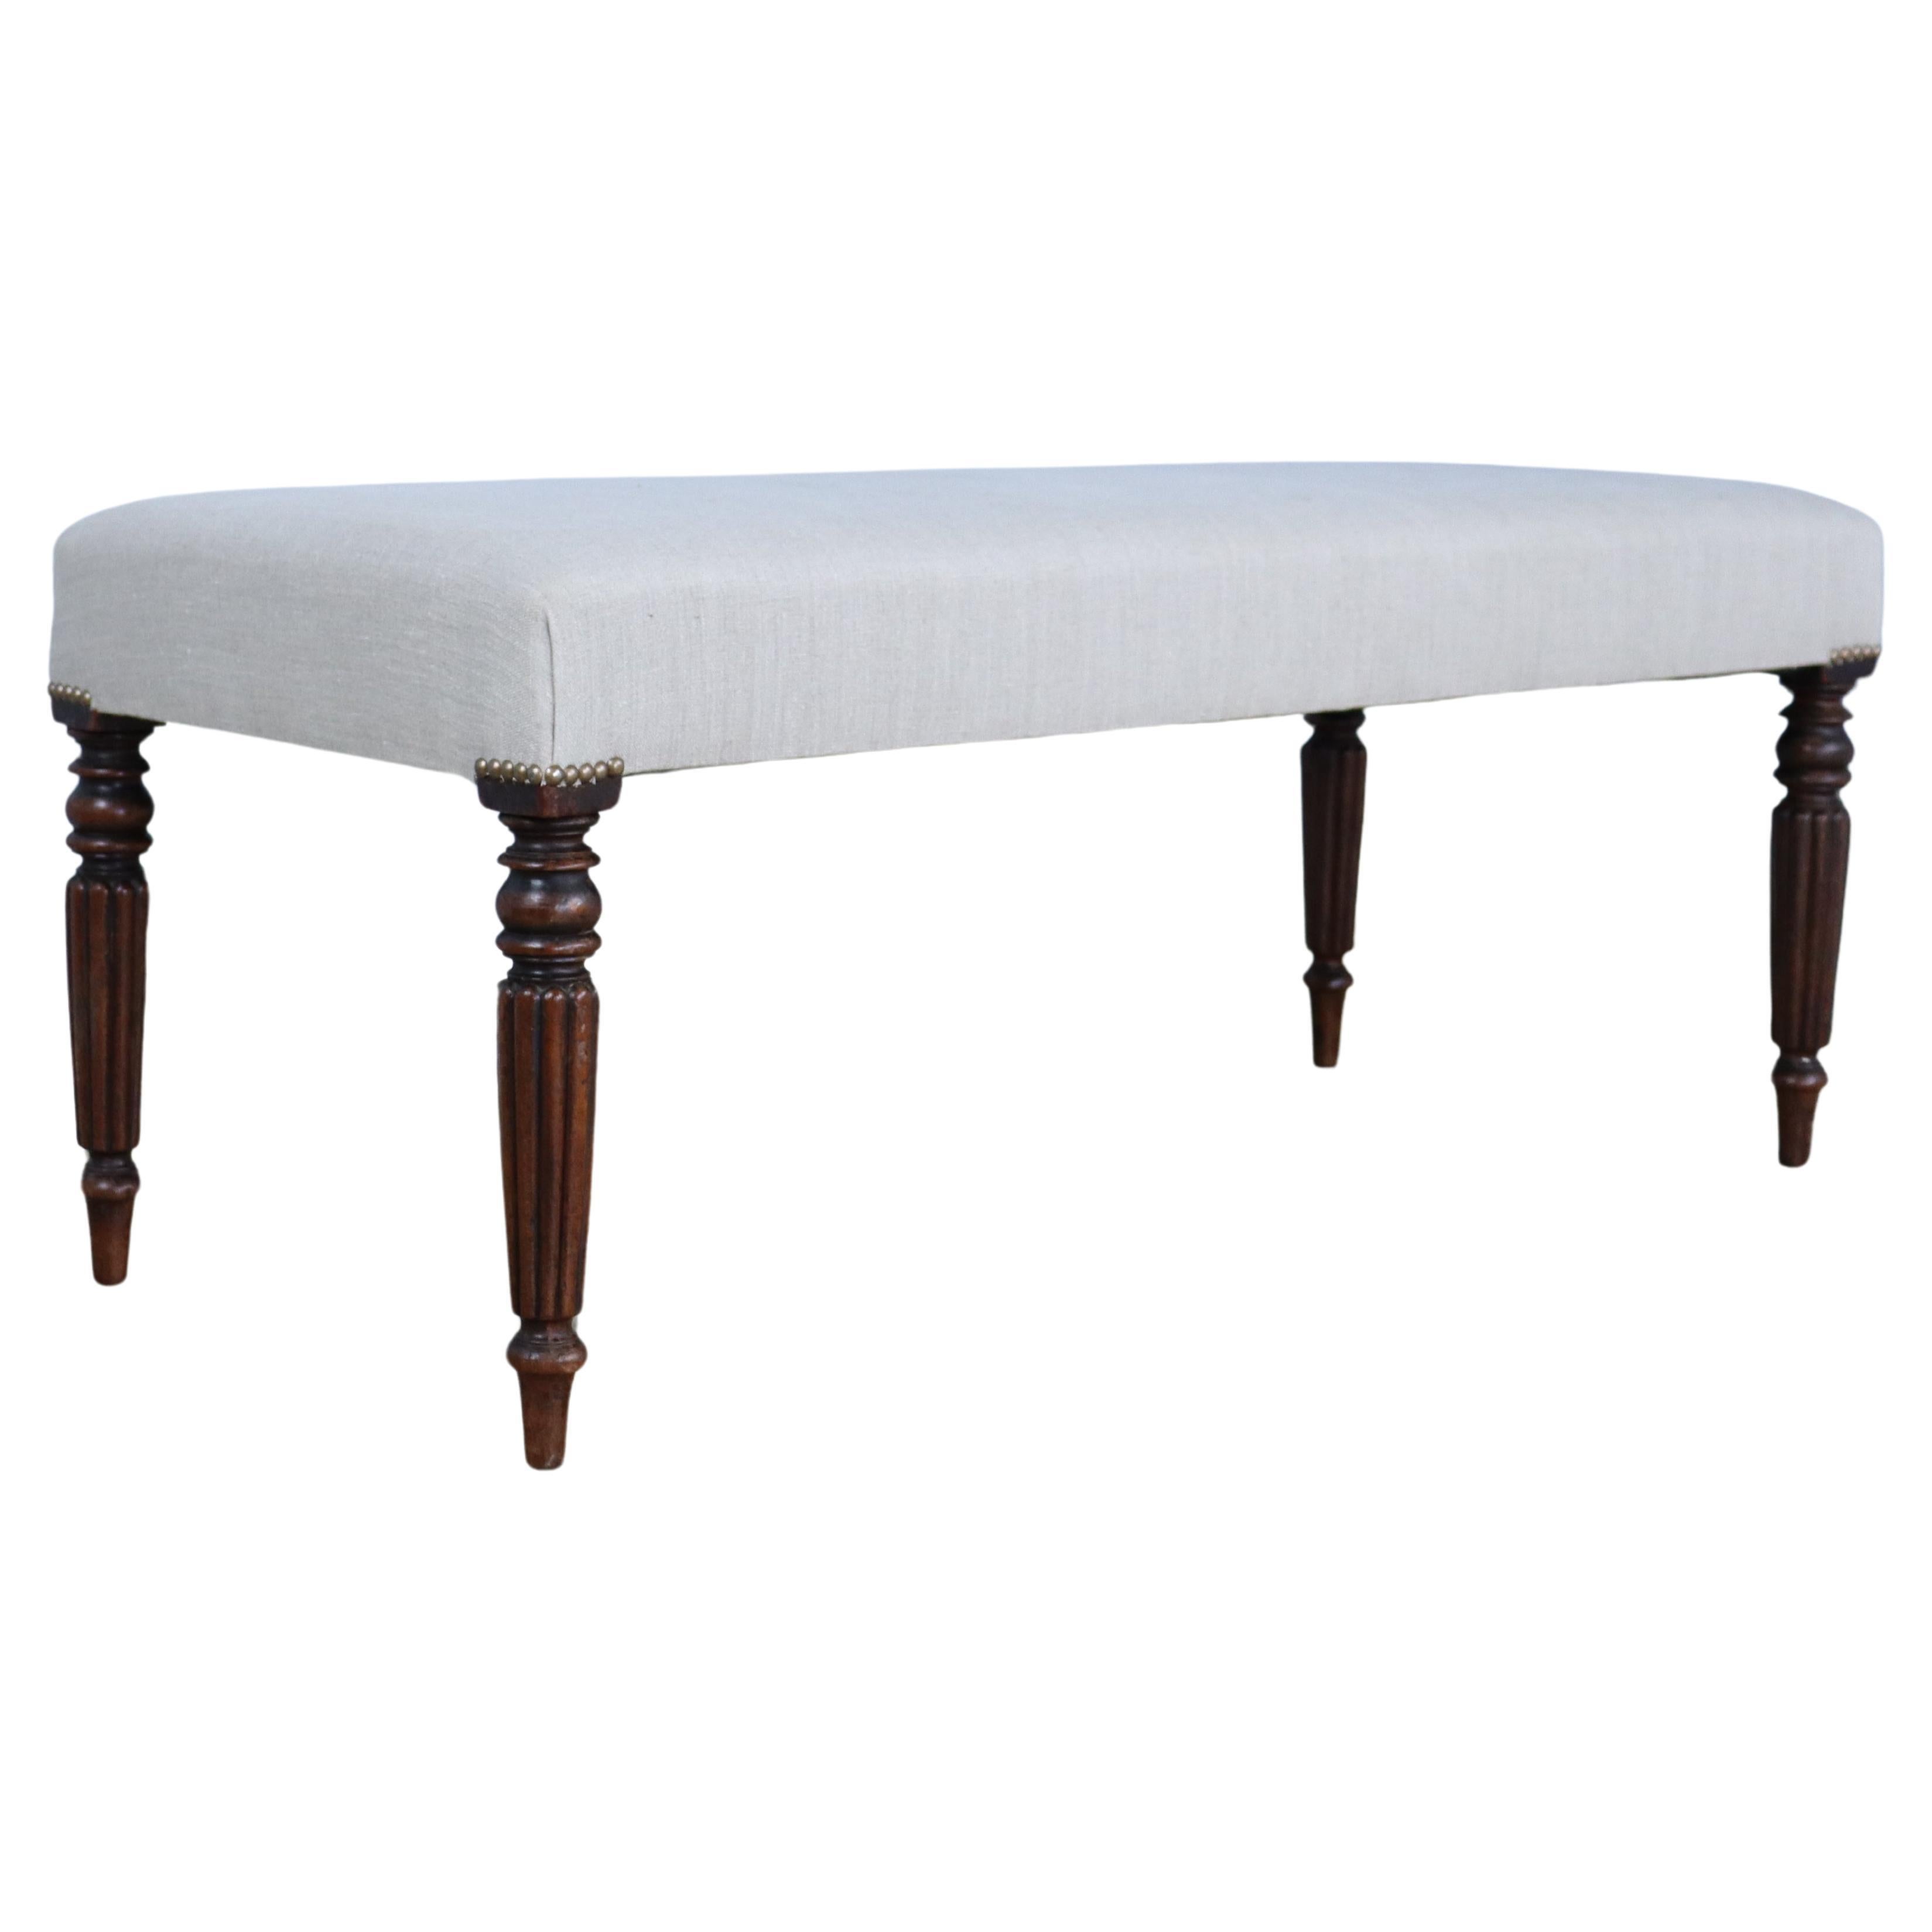 Upholstered Mahogany Bench with Fluted Legs